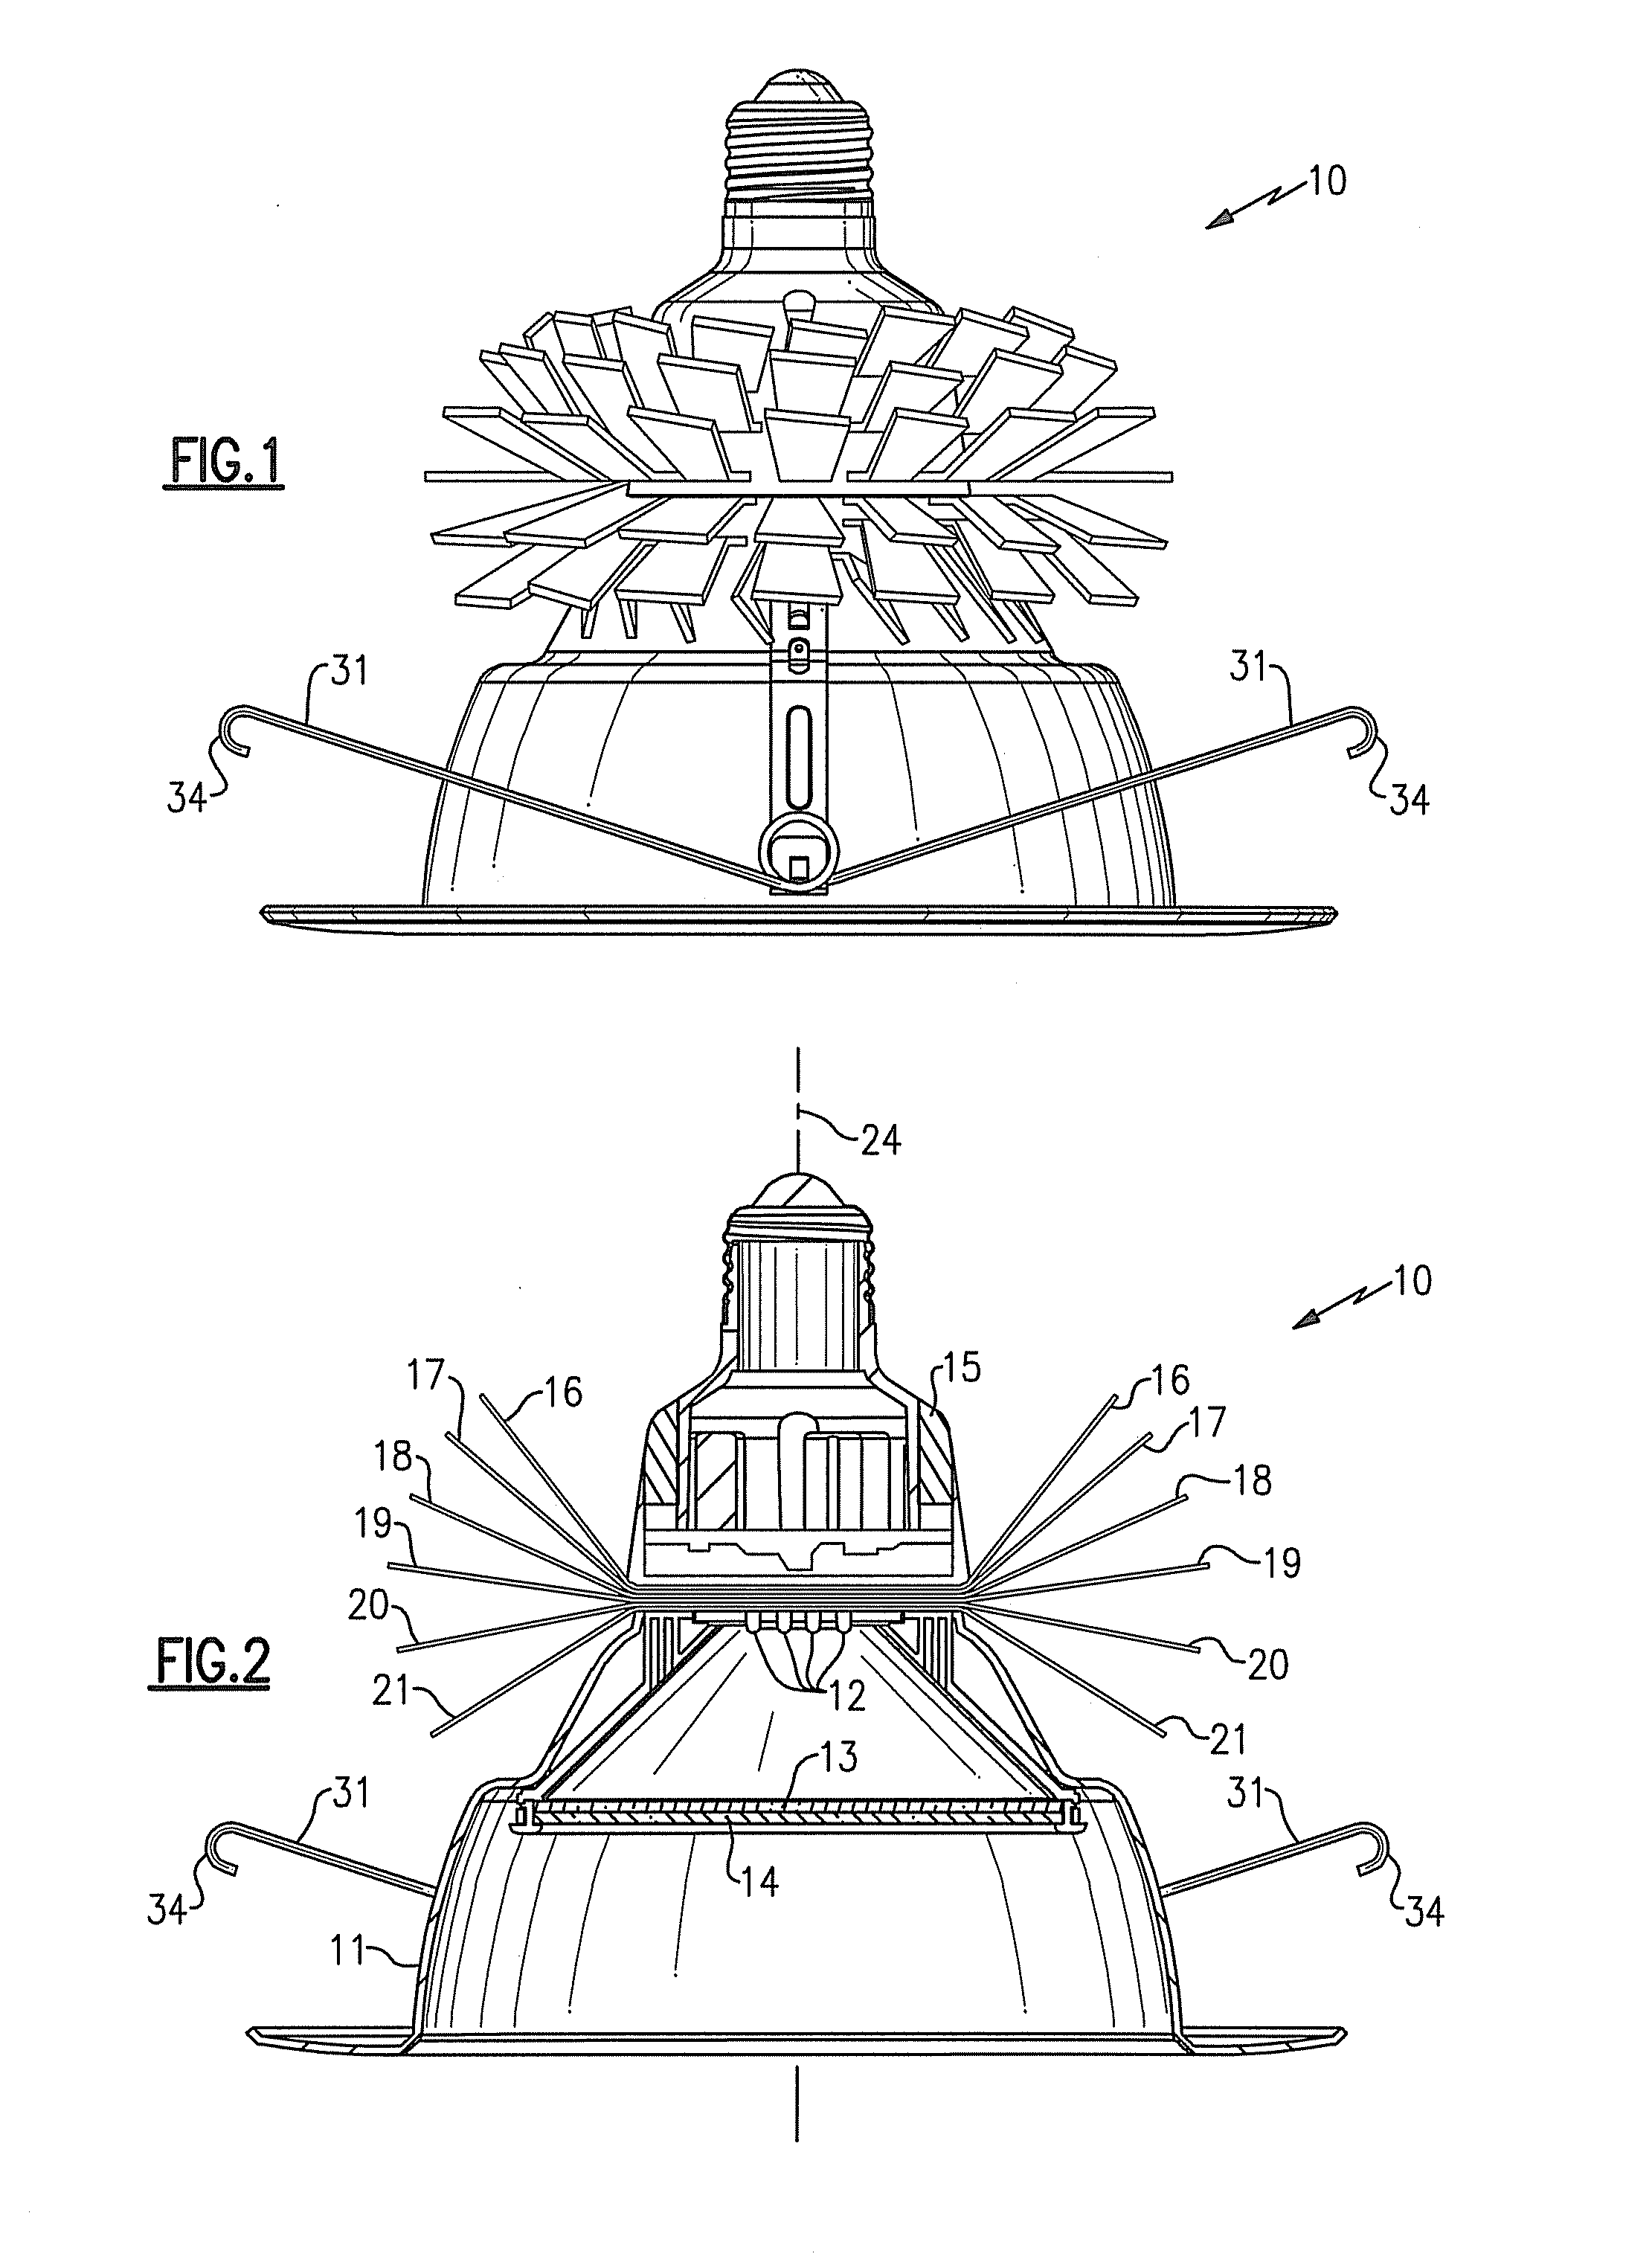 Lighting device with one or more removable heat sink elements